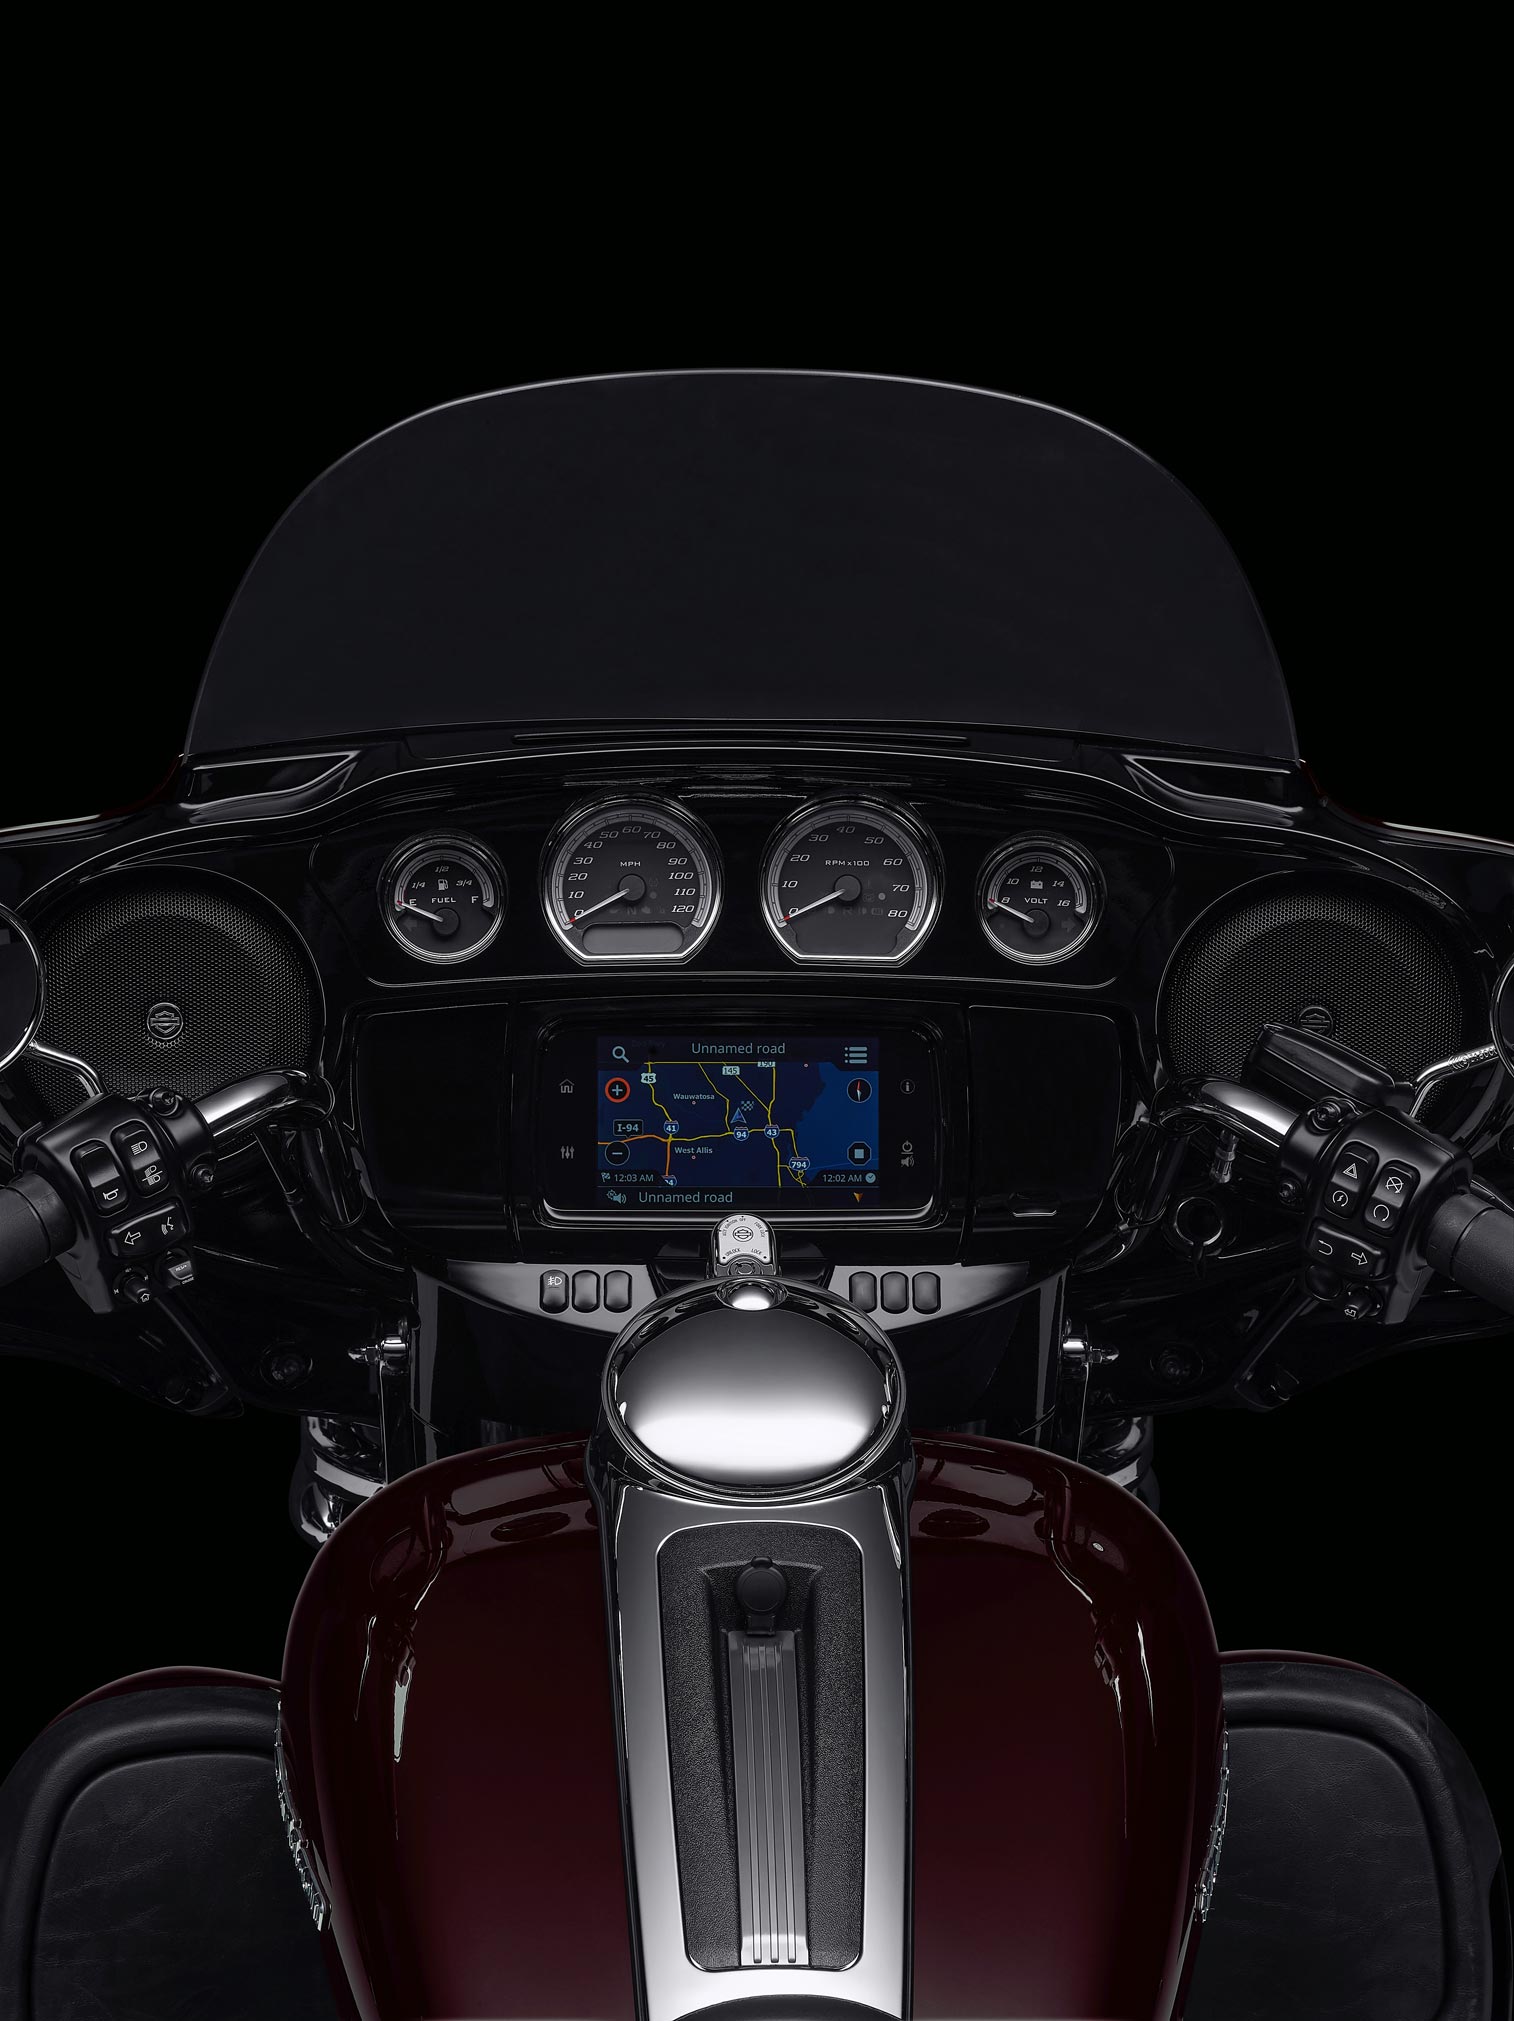 2021 Harley Davidson Ultra Limited Guide Total Motorcycle